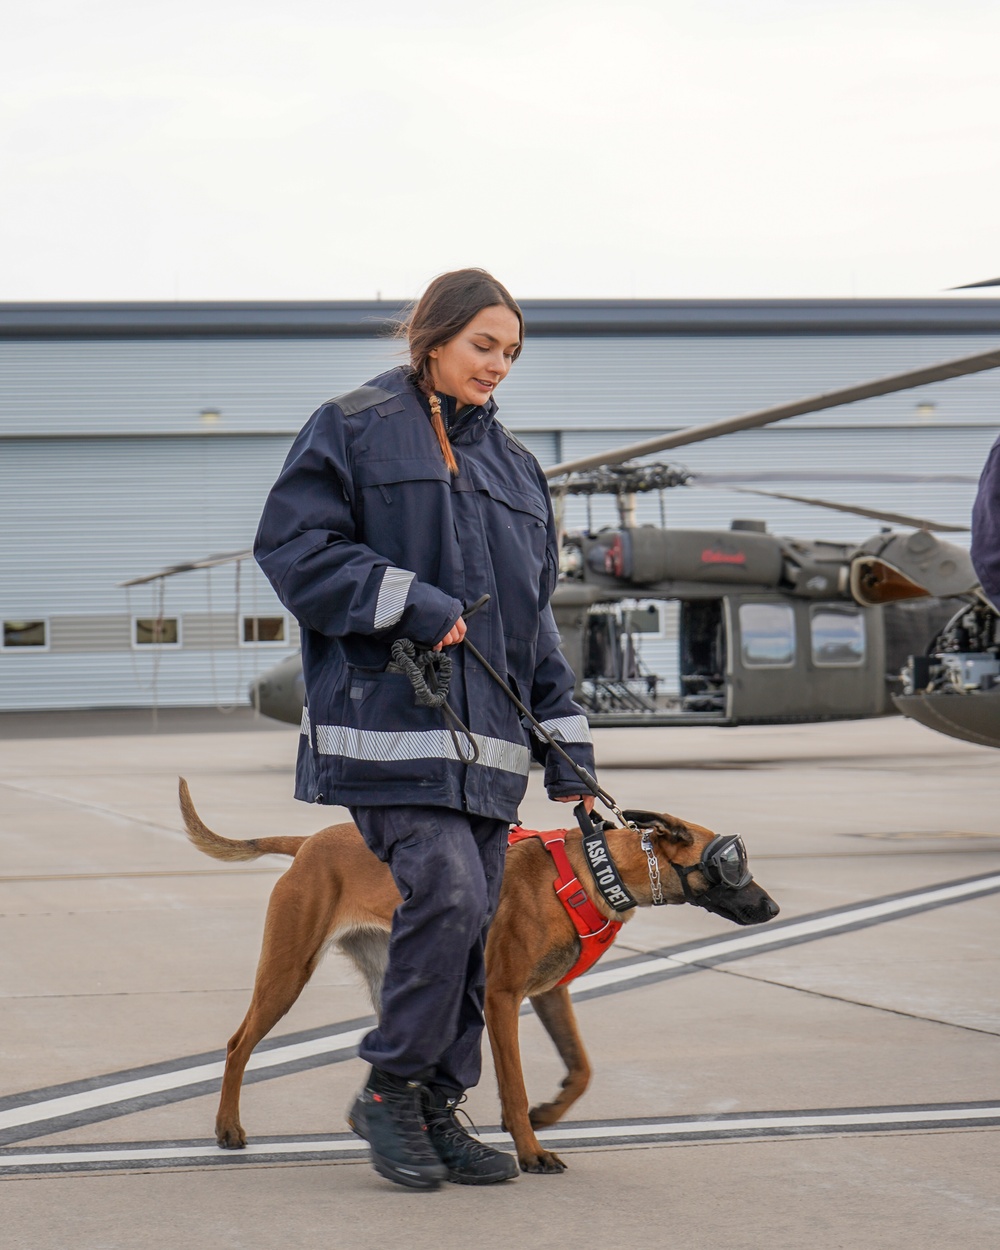 COARNG and CO-TF1 Conduct K-9 Winter Search and Rescue Training